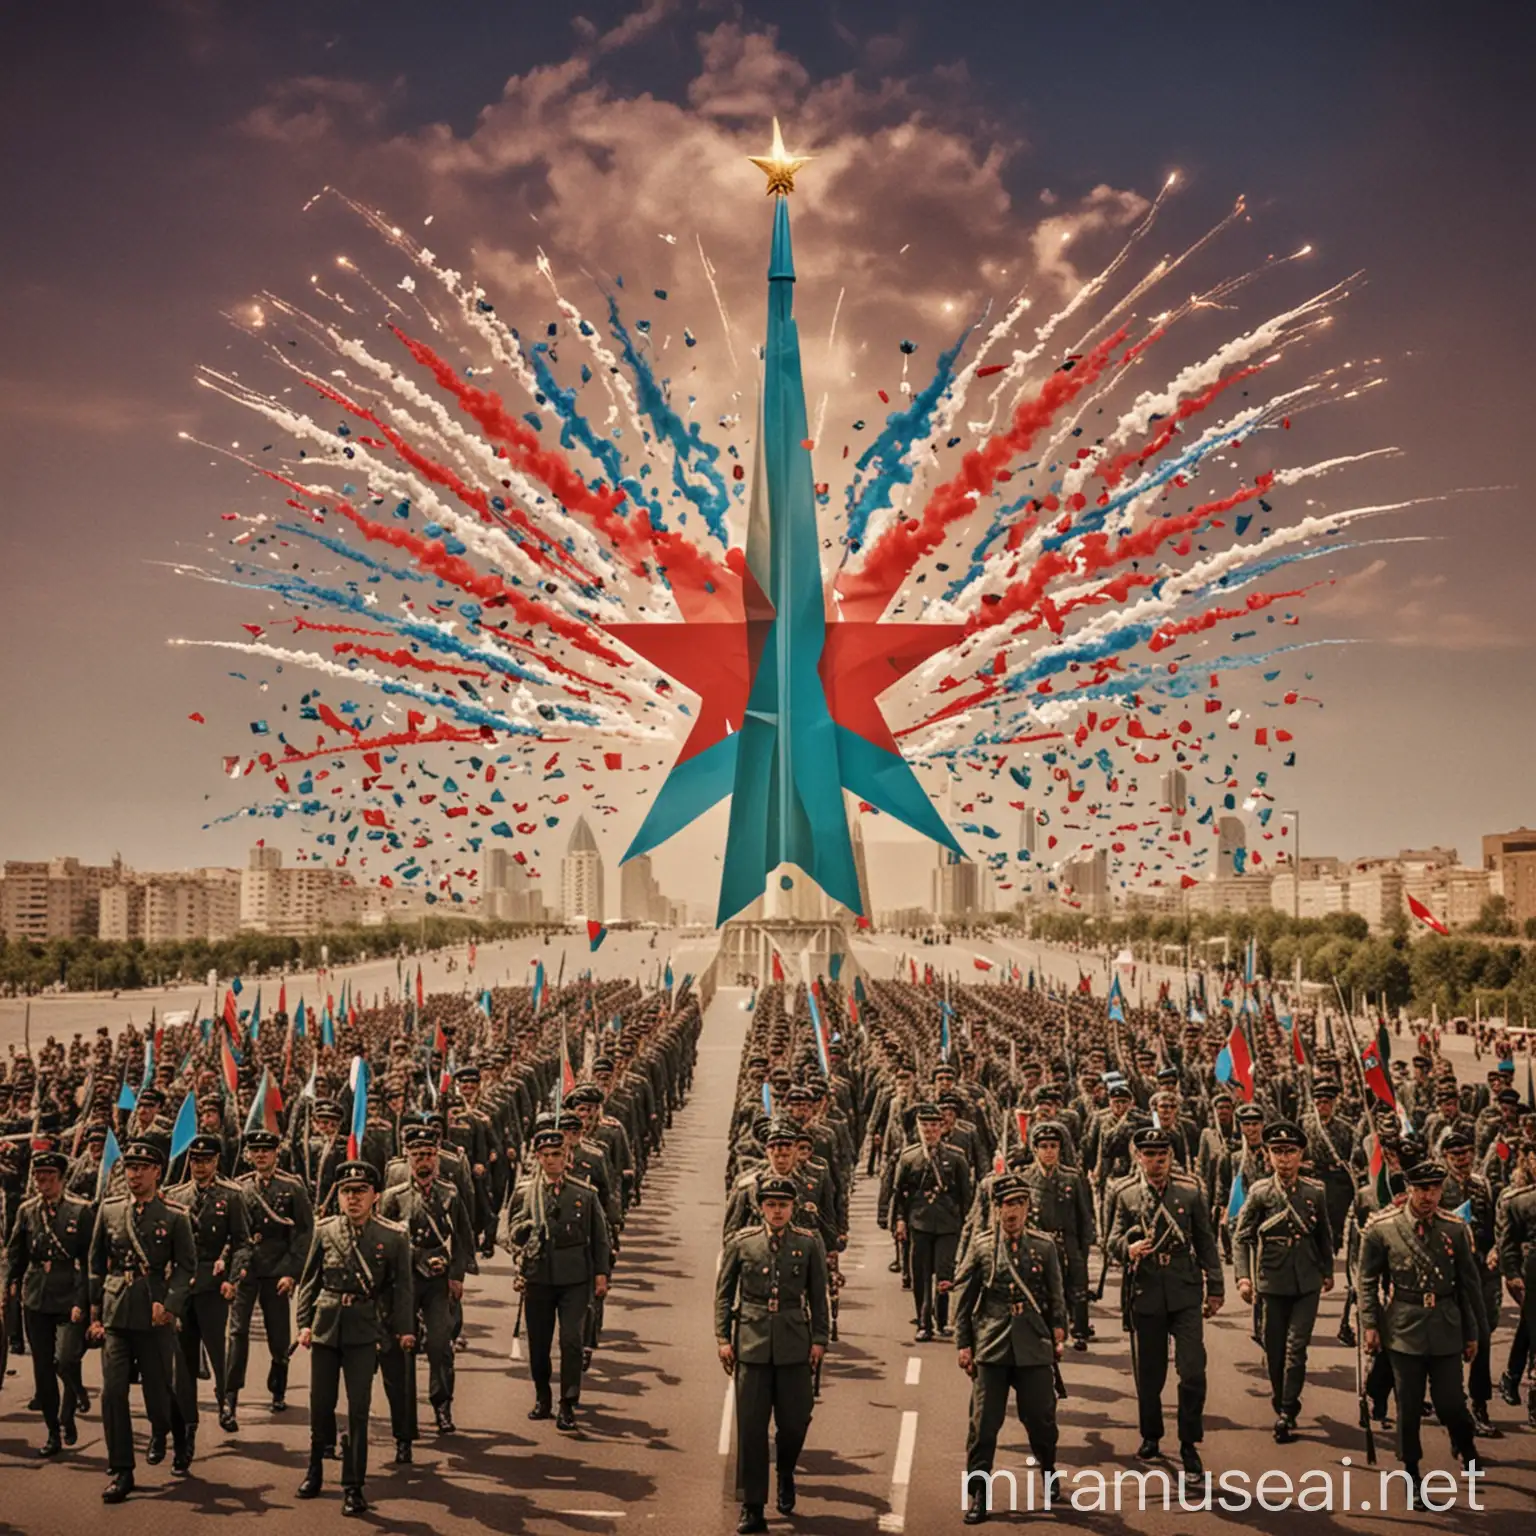 Celebrating Victory Day in Azerbaijan Commemorating Triumph with Flags and Festivities